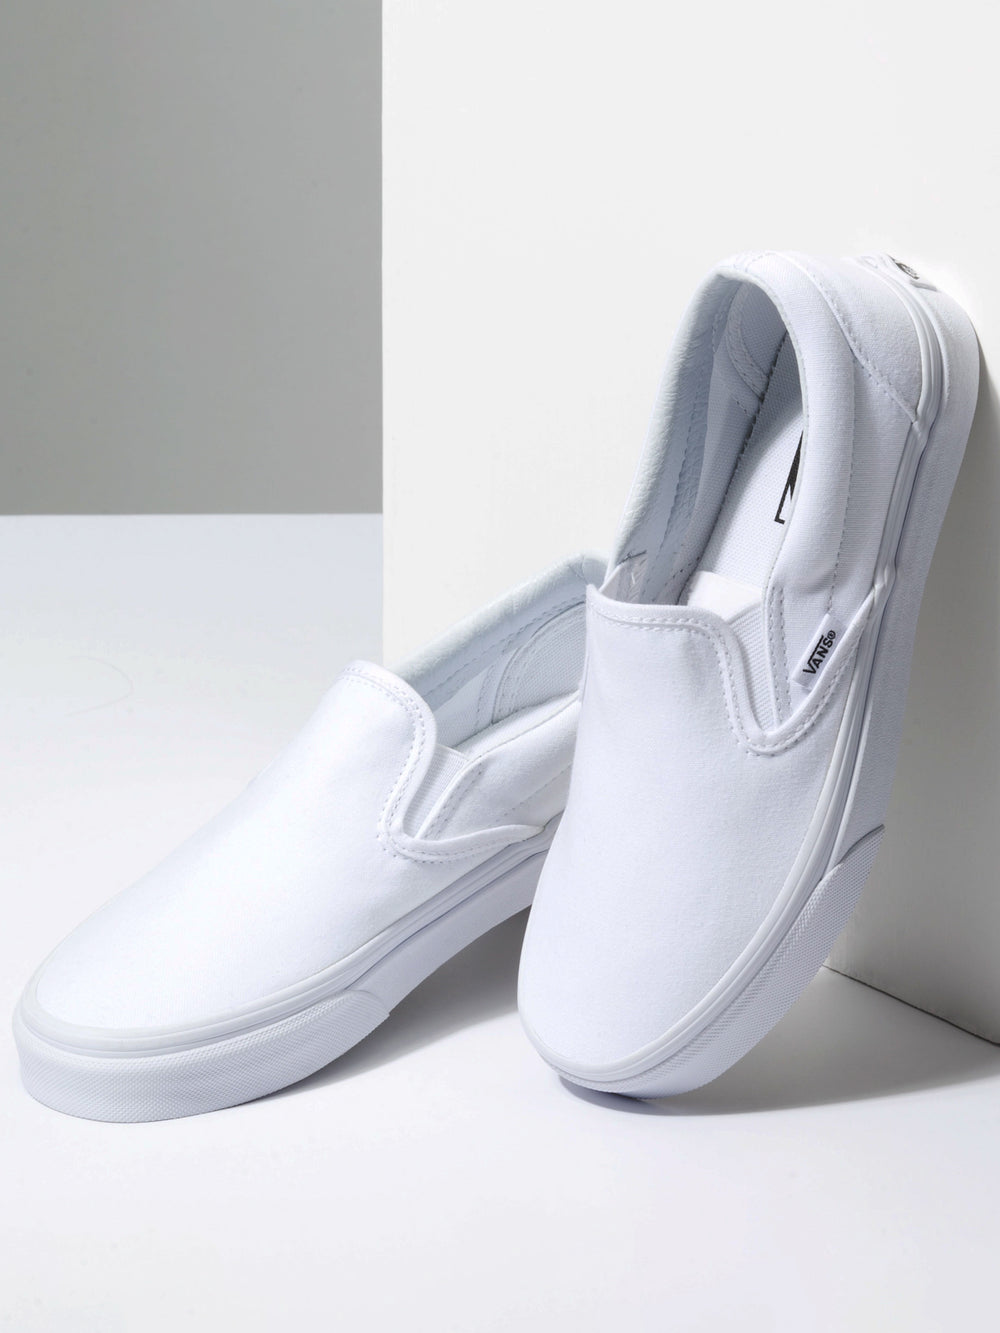 Dangle Præferencebehandling trist WOMENS VANS CLASSIC SLIP-ON TRUE WHITE CANVAS SHOES | Boathouse Footwear  Collective